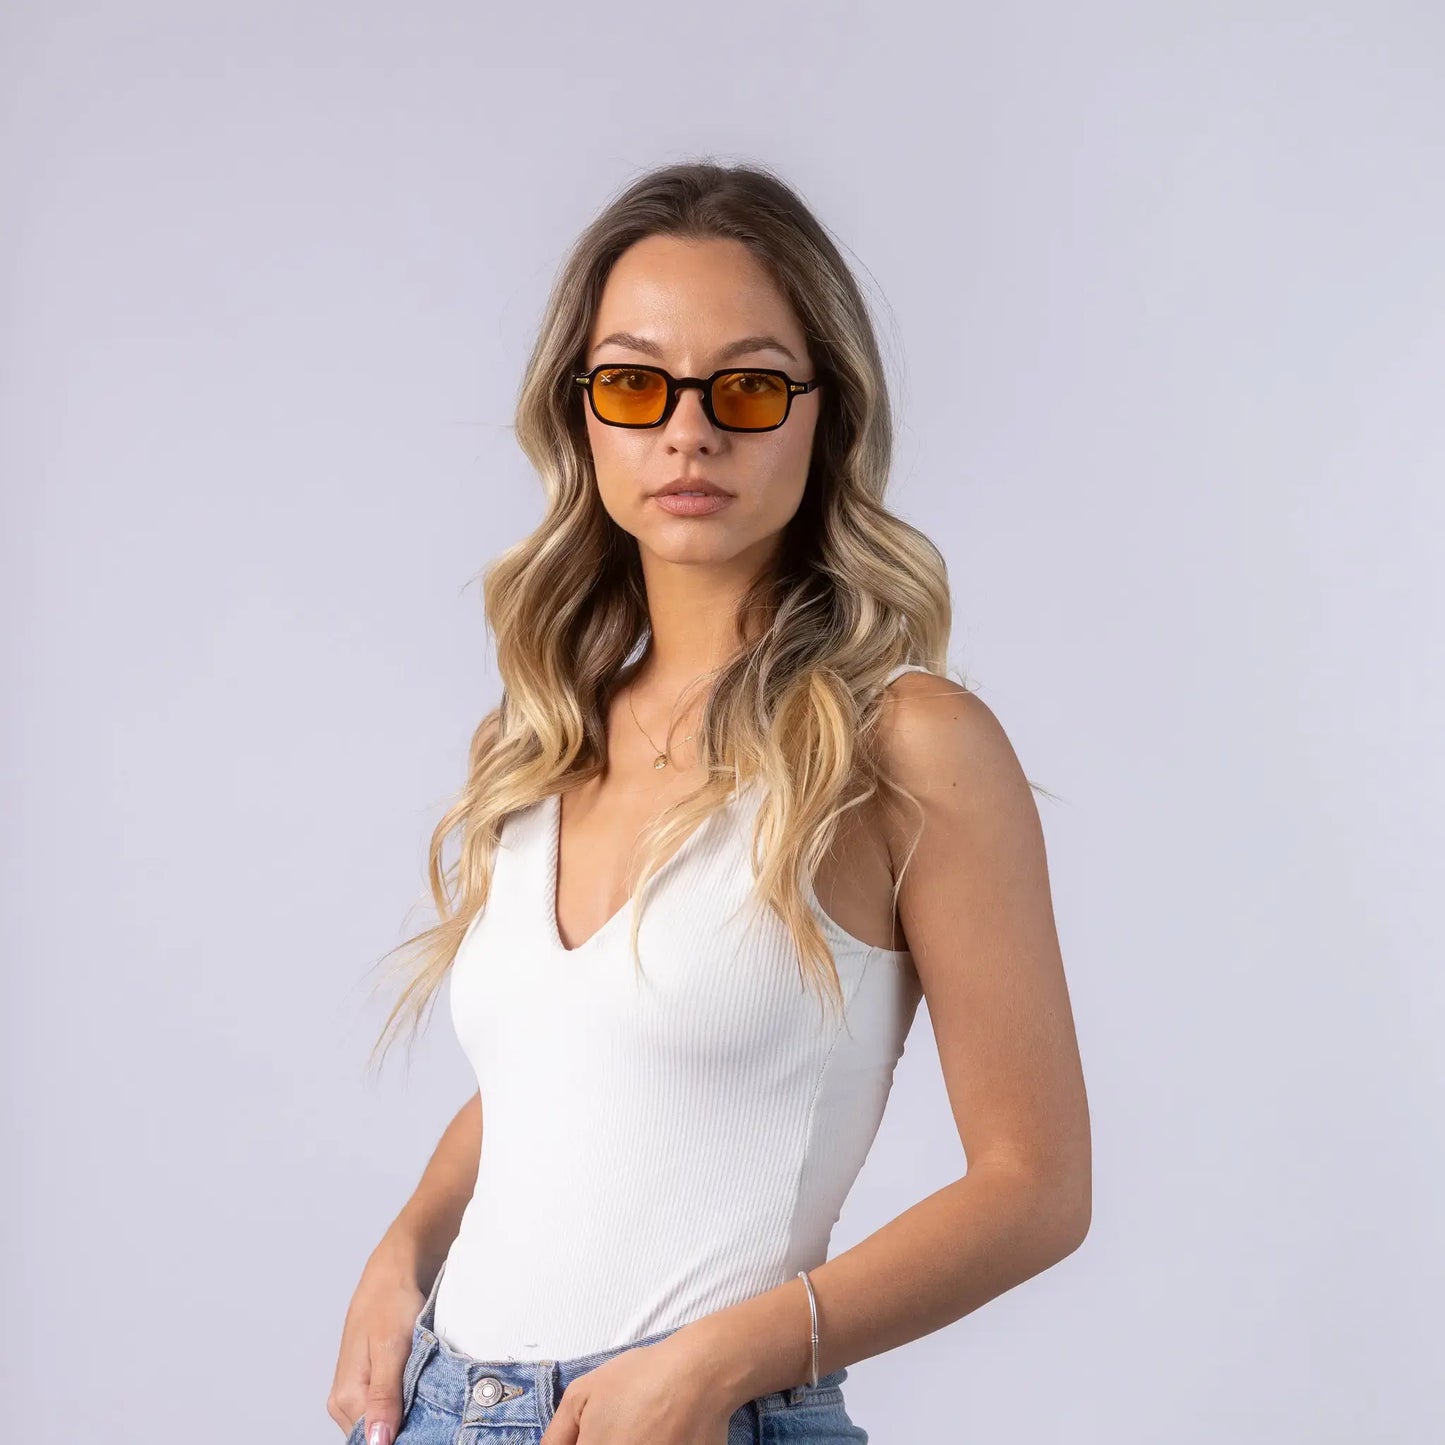 A female model wearing Exposure Sunglasses polarized sunglasses with black frames and orange lenses, posing against a white background.